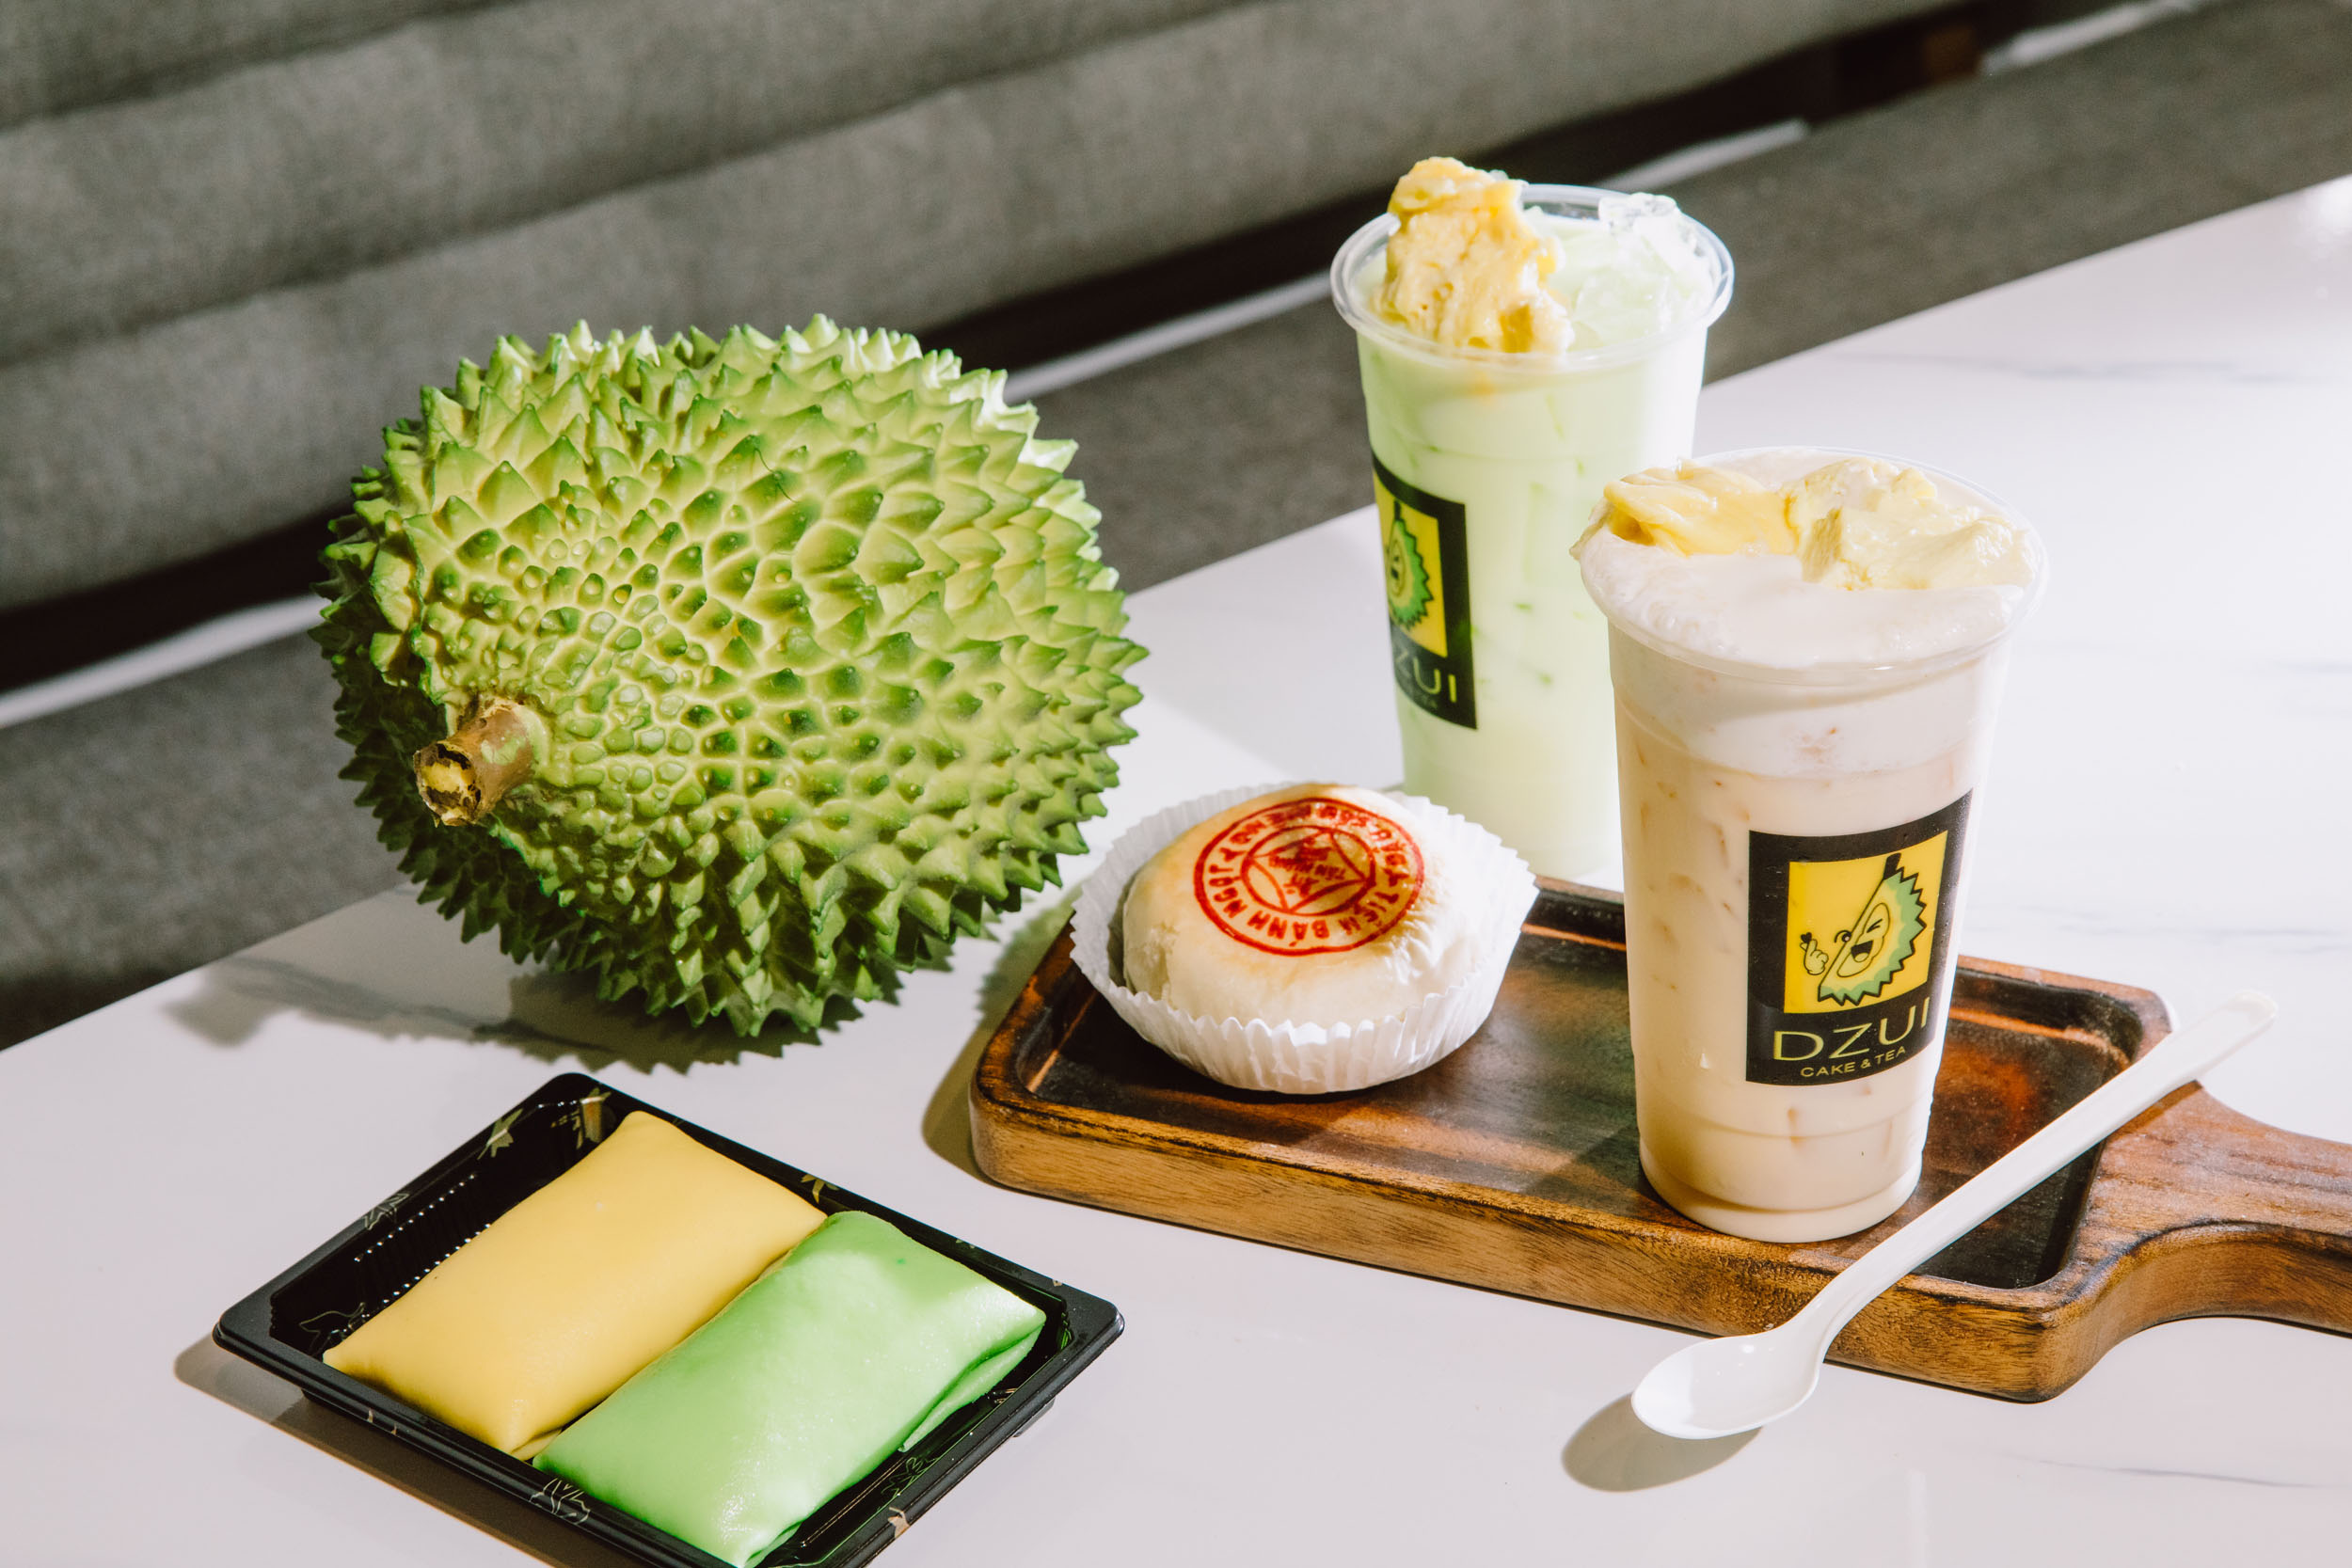 Two Vietnamese milk tea drinks, a pastry and a spiky green durian fruit spread out on a countertop.